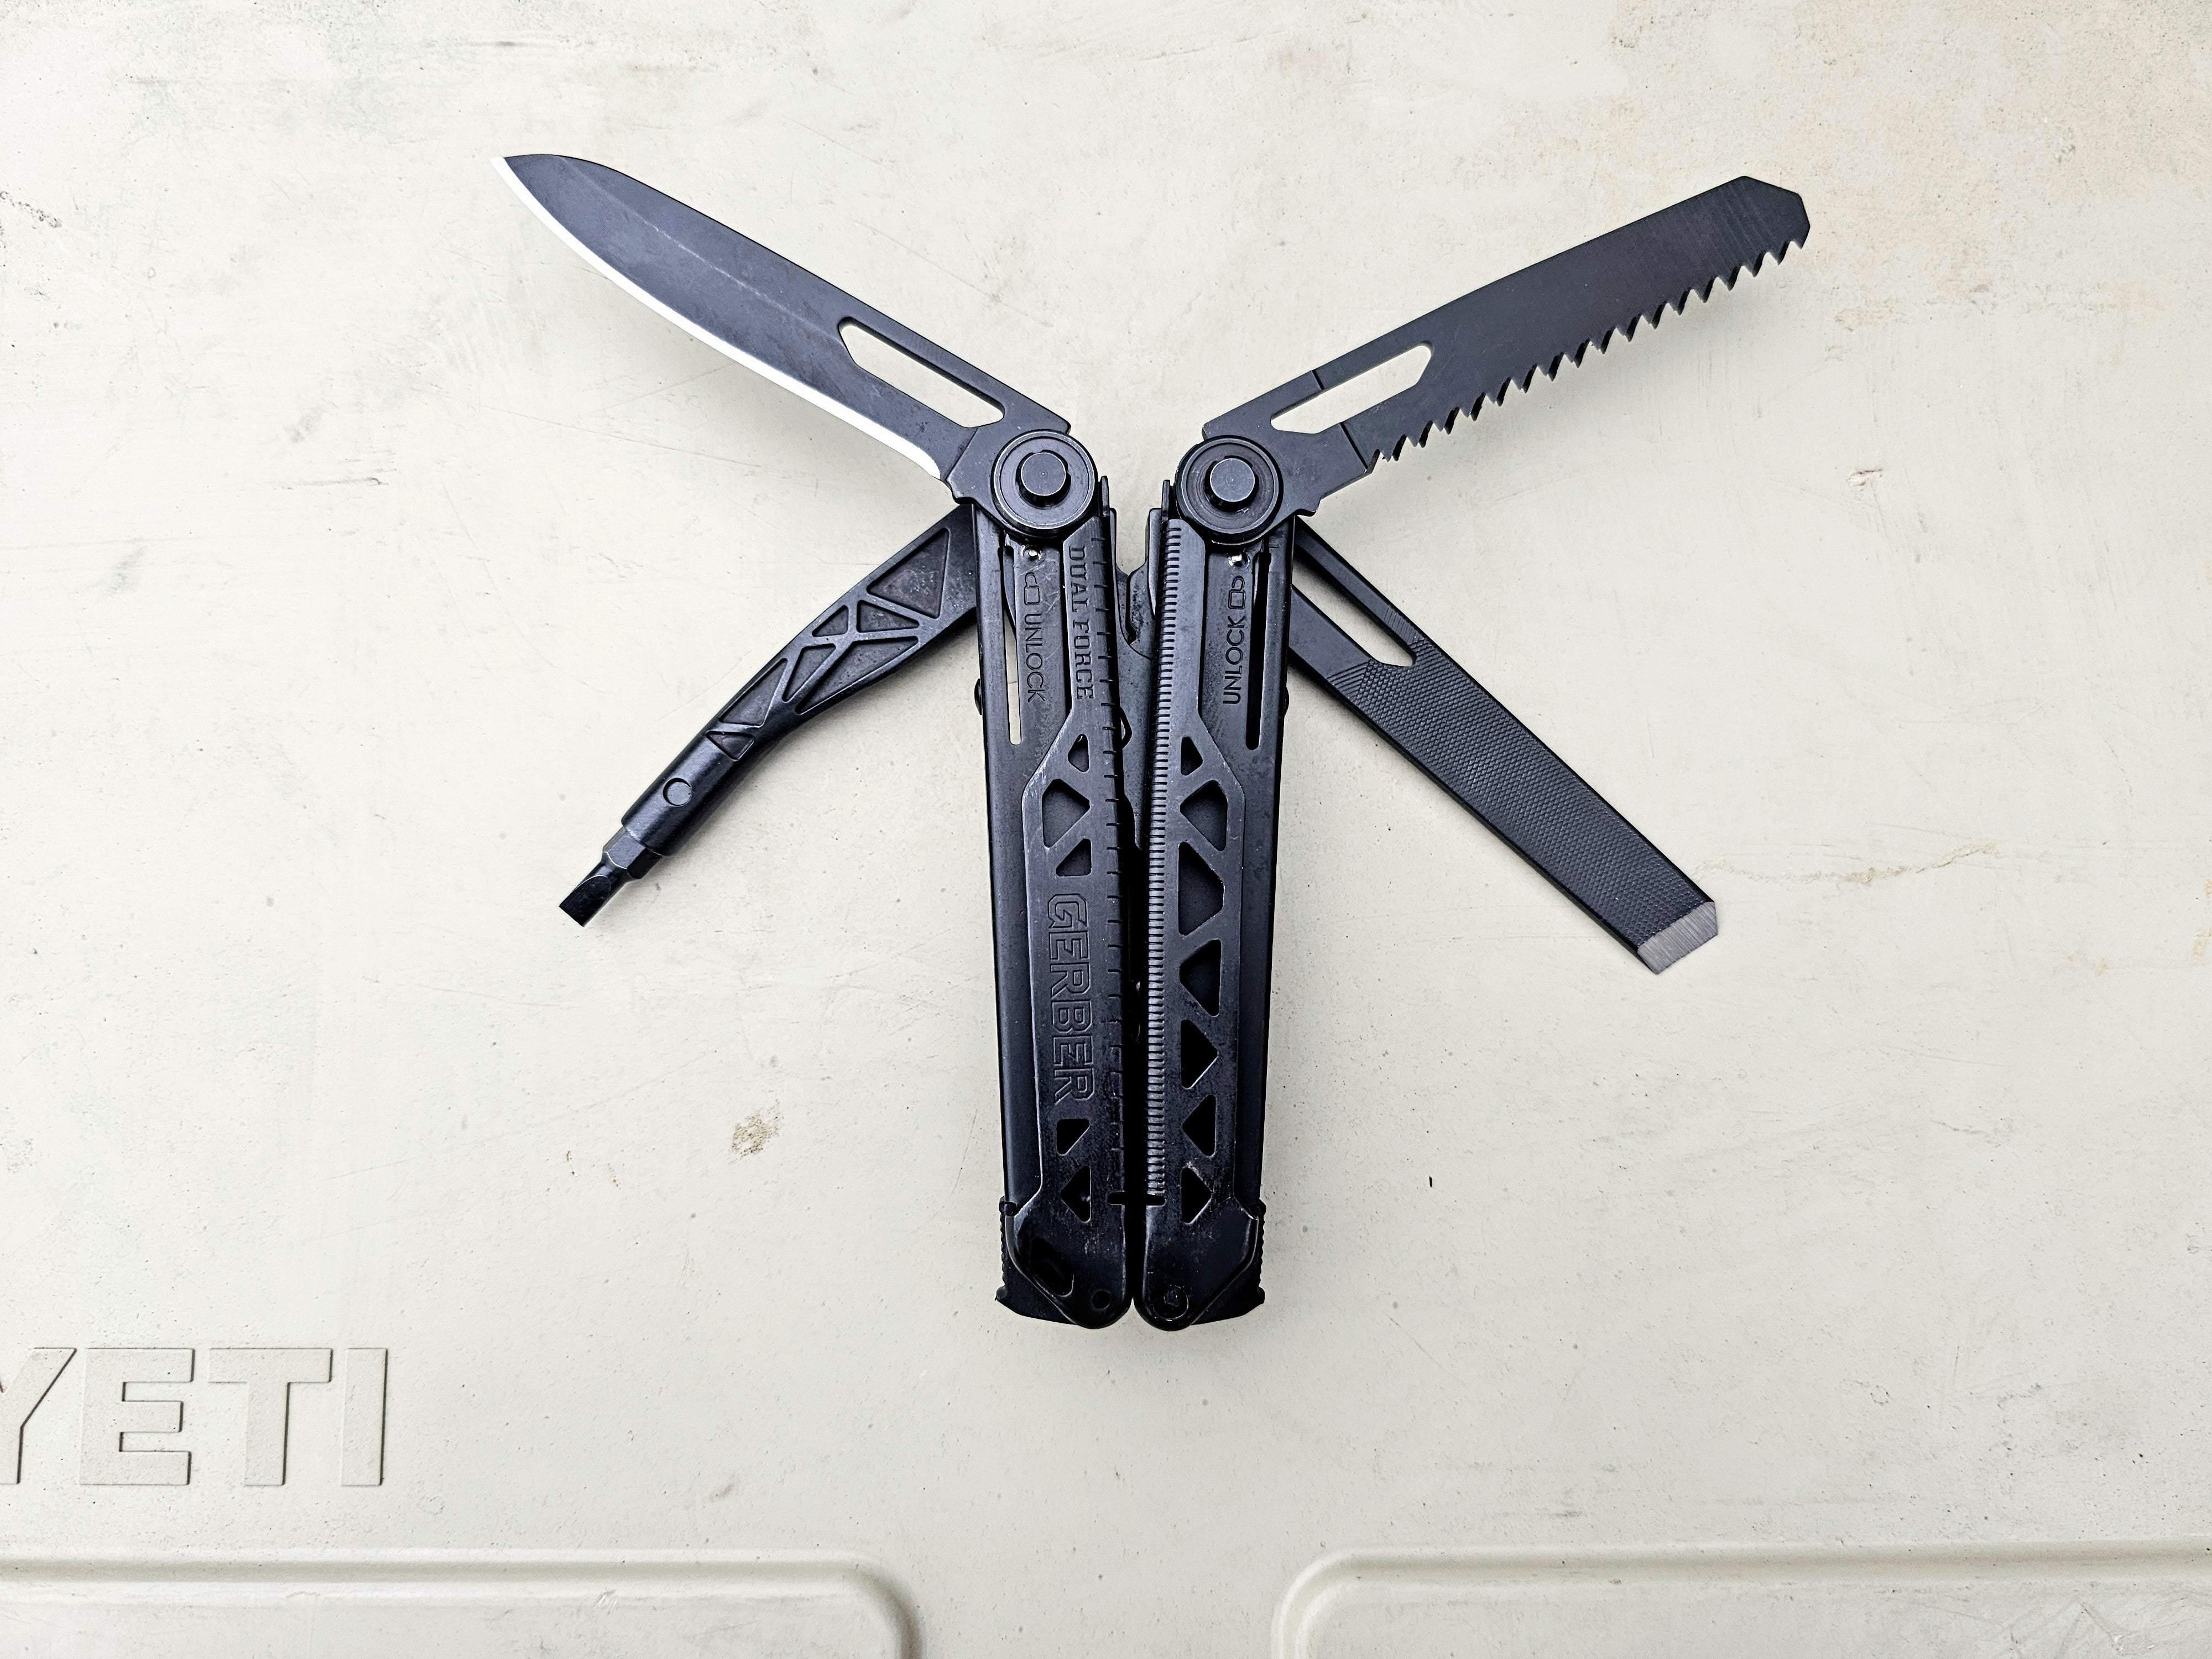 AllOutdoor Review: Gerber Dual-Force Multi-Tool (Black) - Clutch Strength